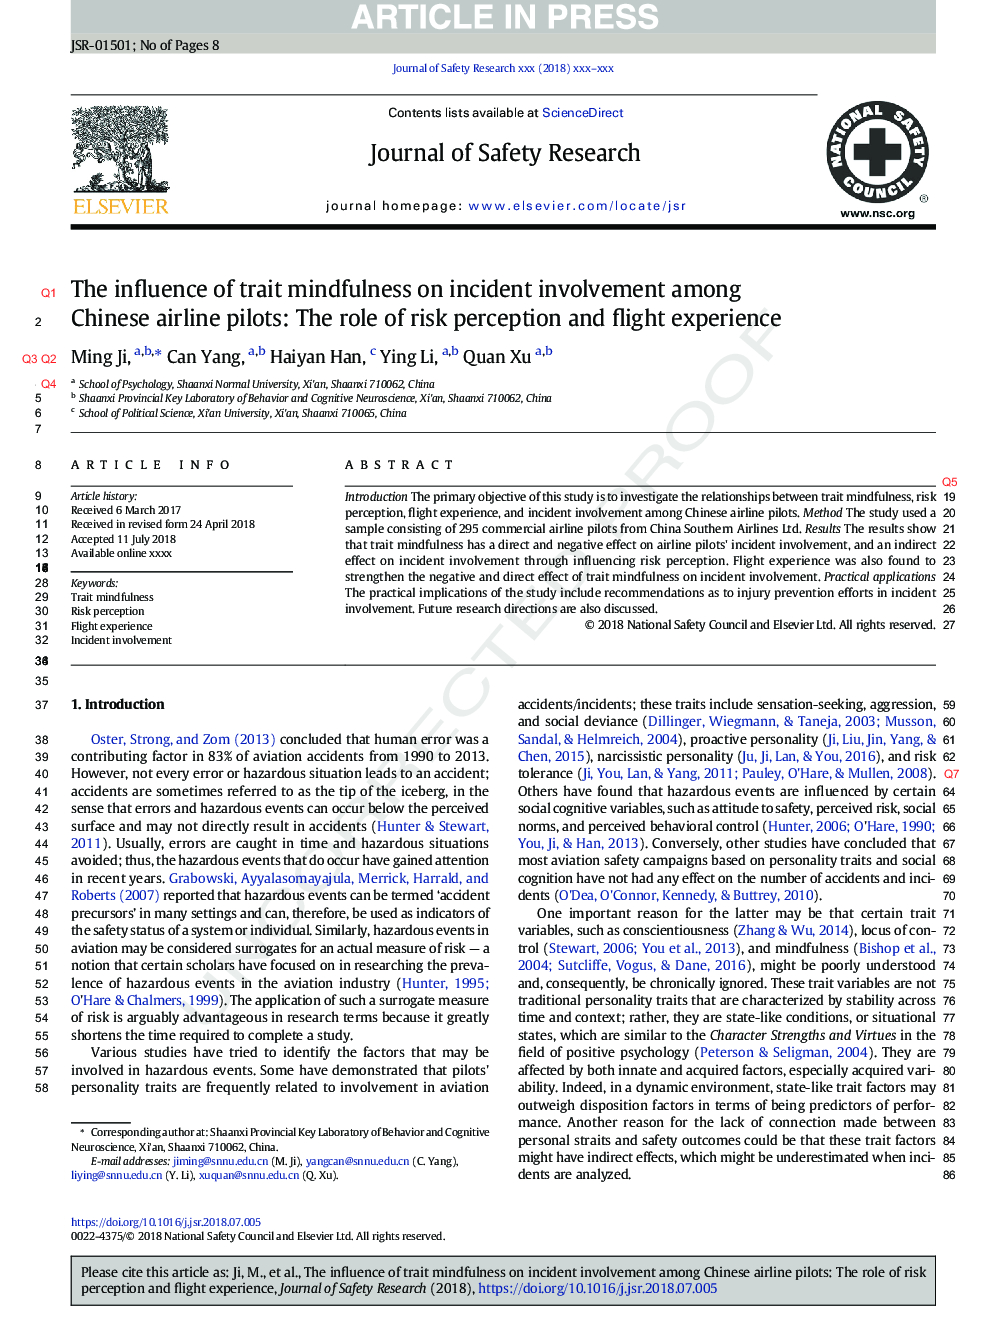 The influence of trait mindfulness on incident involvement among Chinese airline pilots: The role of risk perception and flight experience